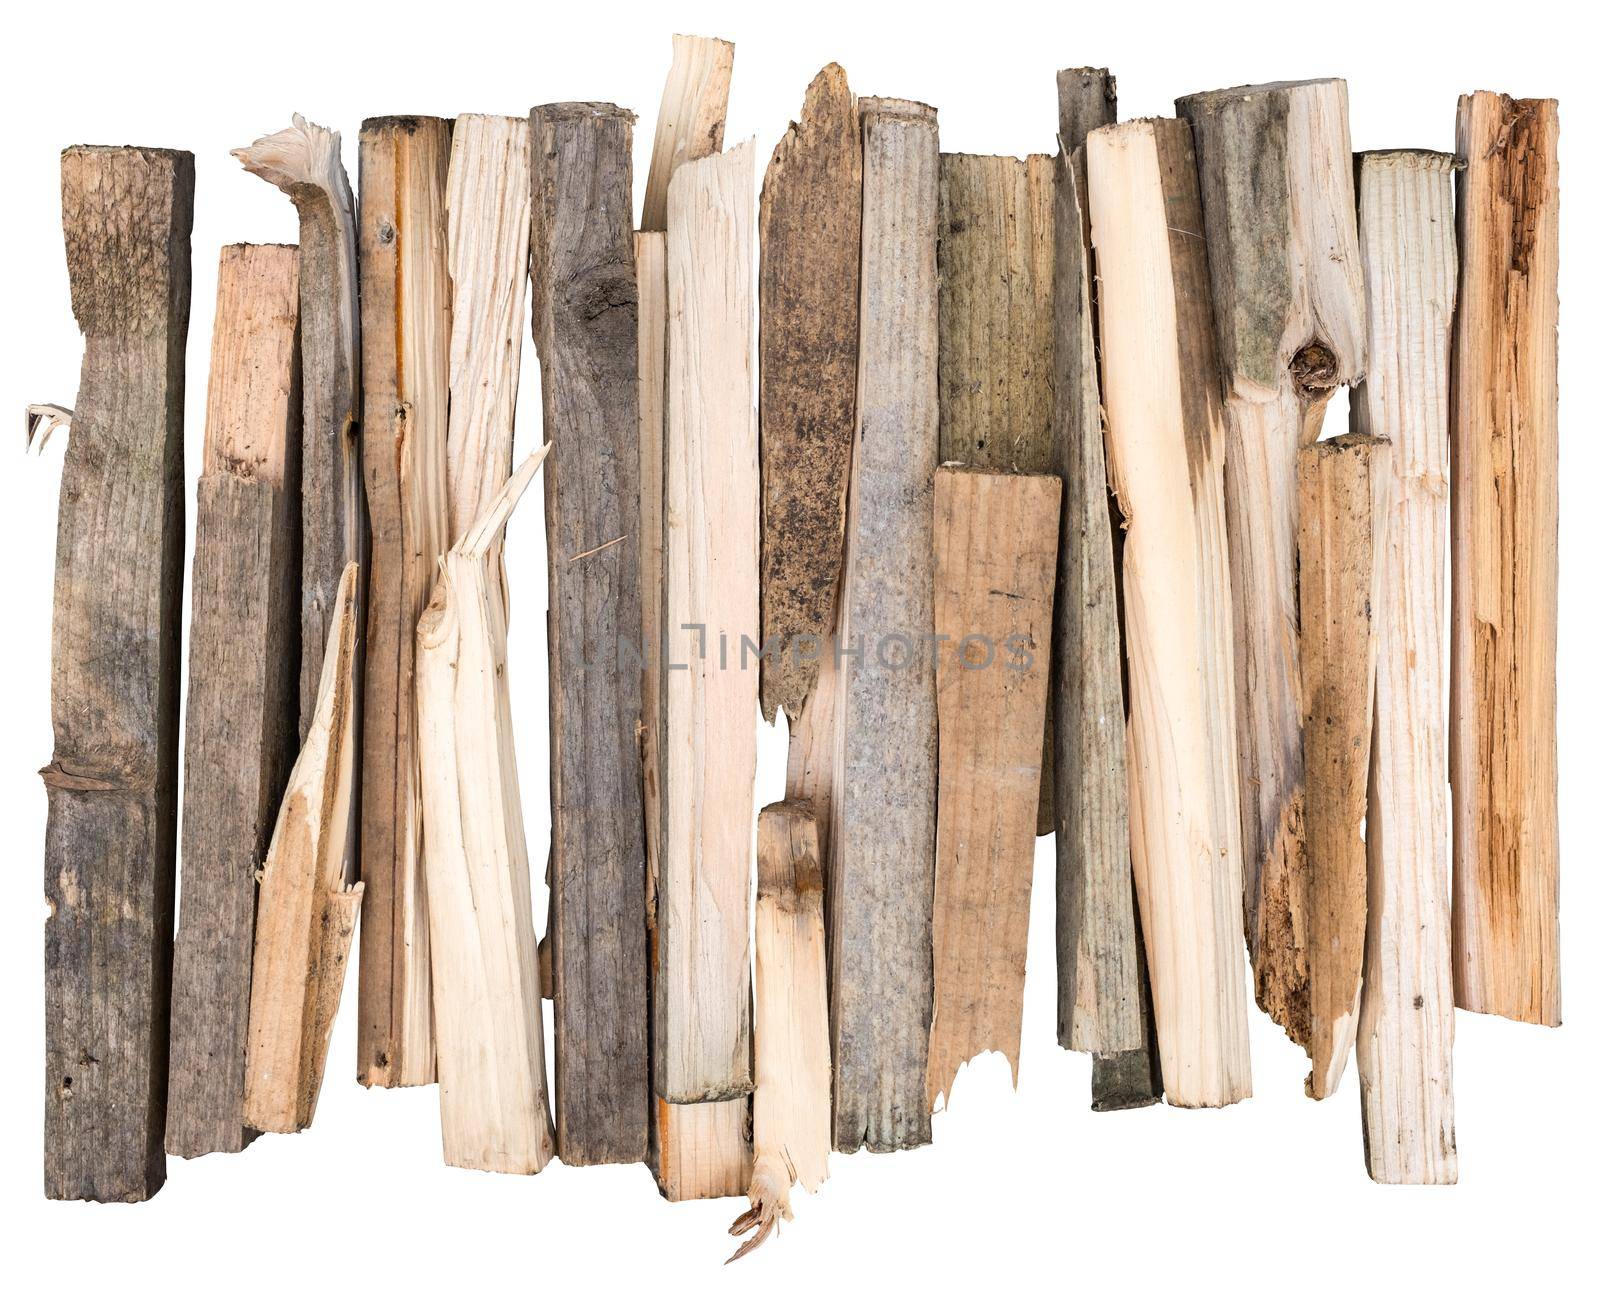 Isolated Kindling For Lighting A Fire On A White Background